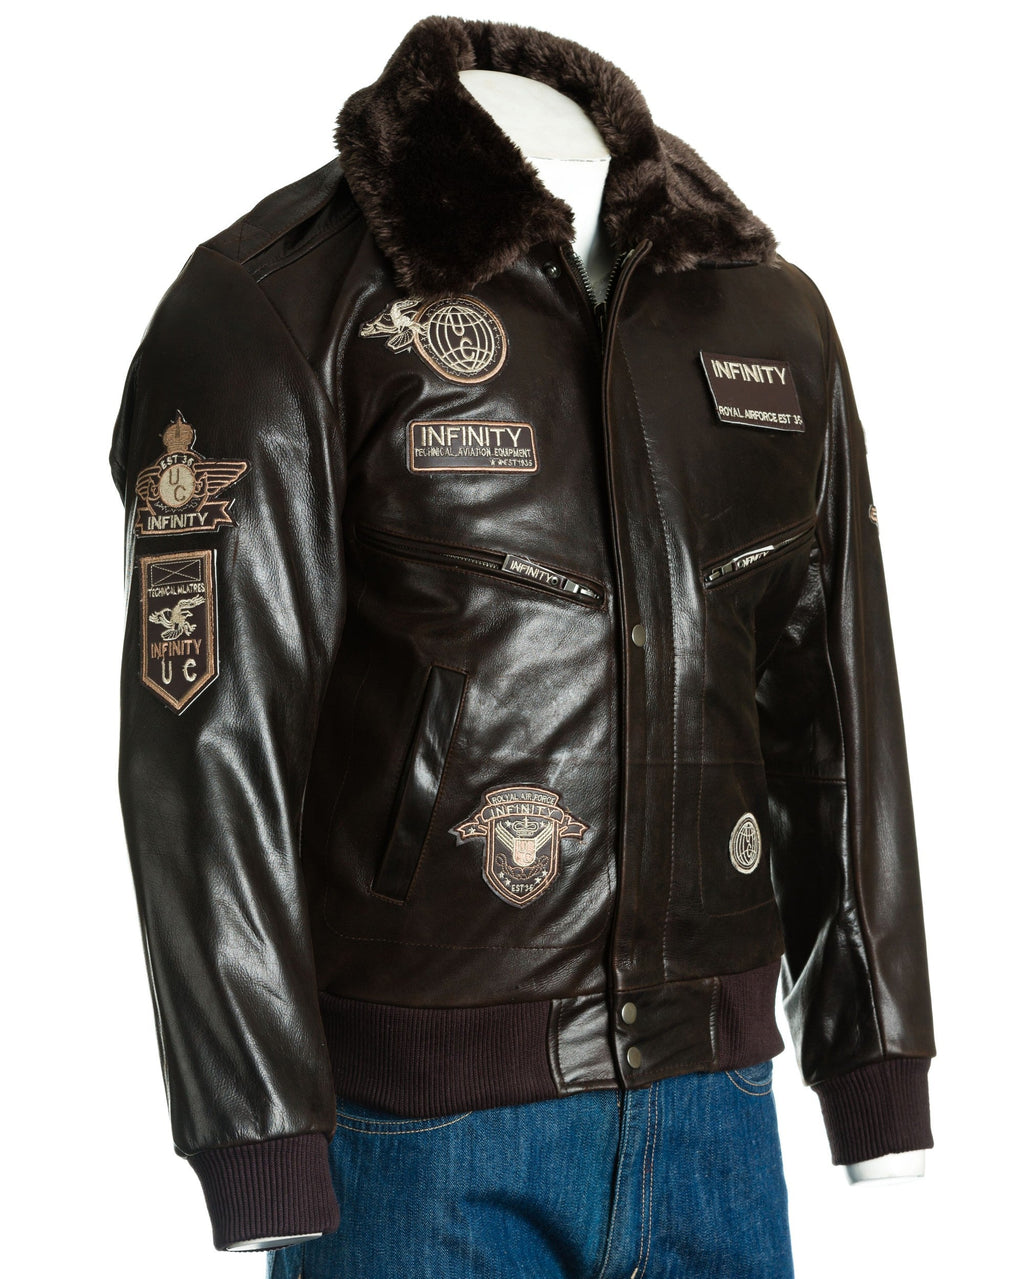 Men's Brown Aviator Pilot Flight A2 Style Leather Jacket With Patch Detail And Detachable Faux Fur Collar: Giuseppe